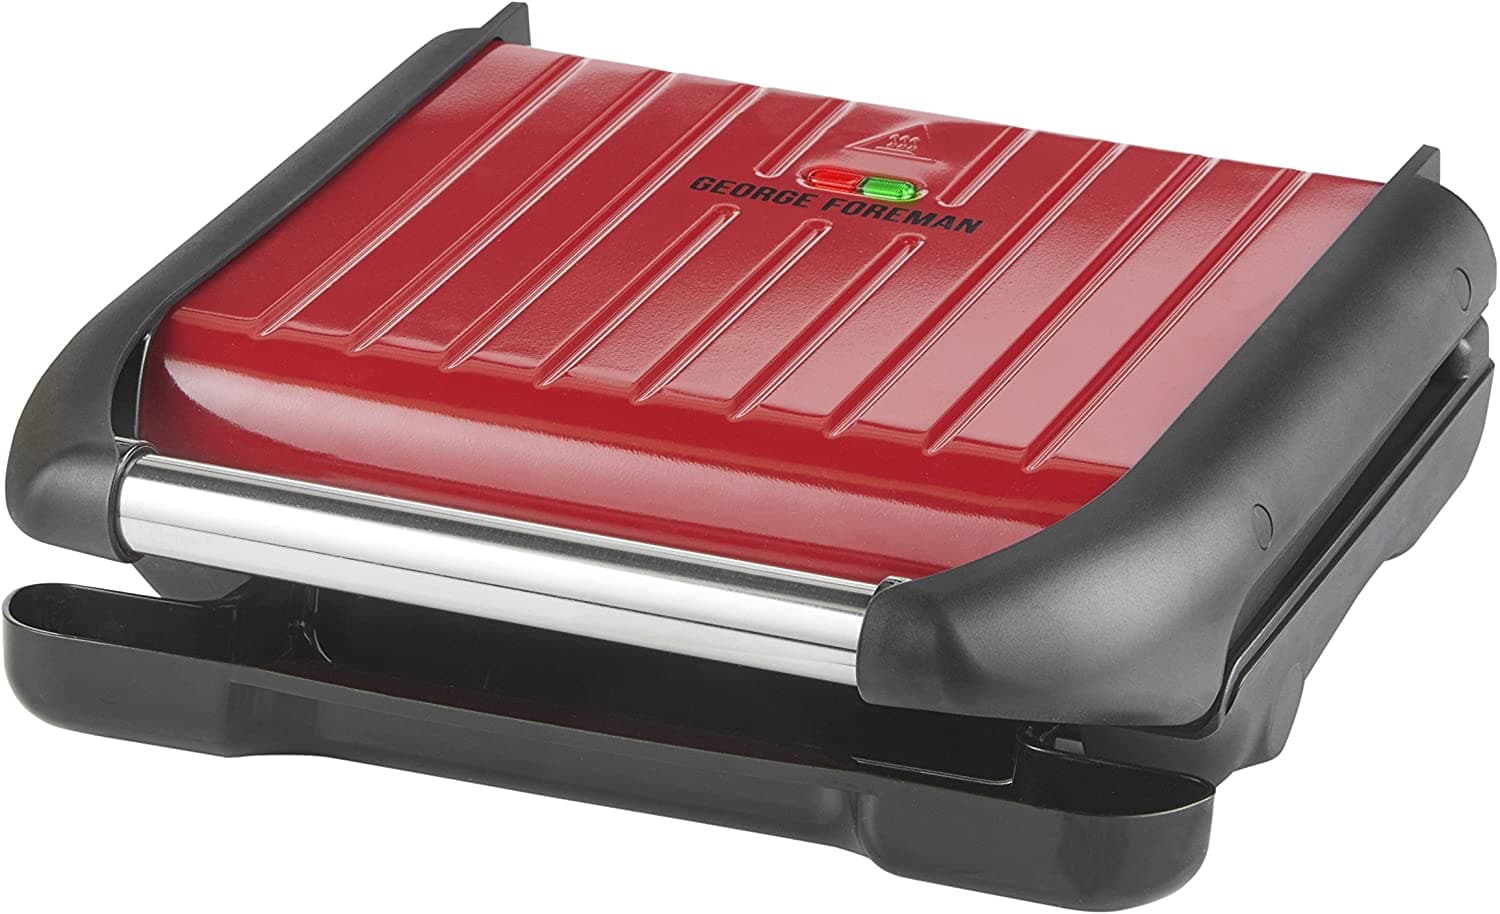 GEORGE FOREMAN RED STEEL GRILL - 25040